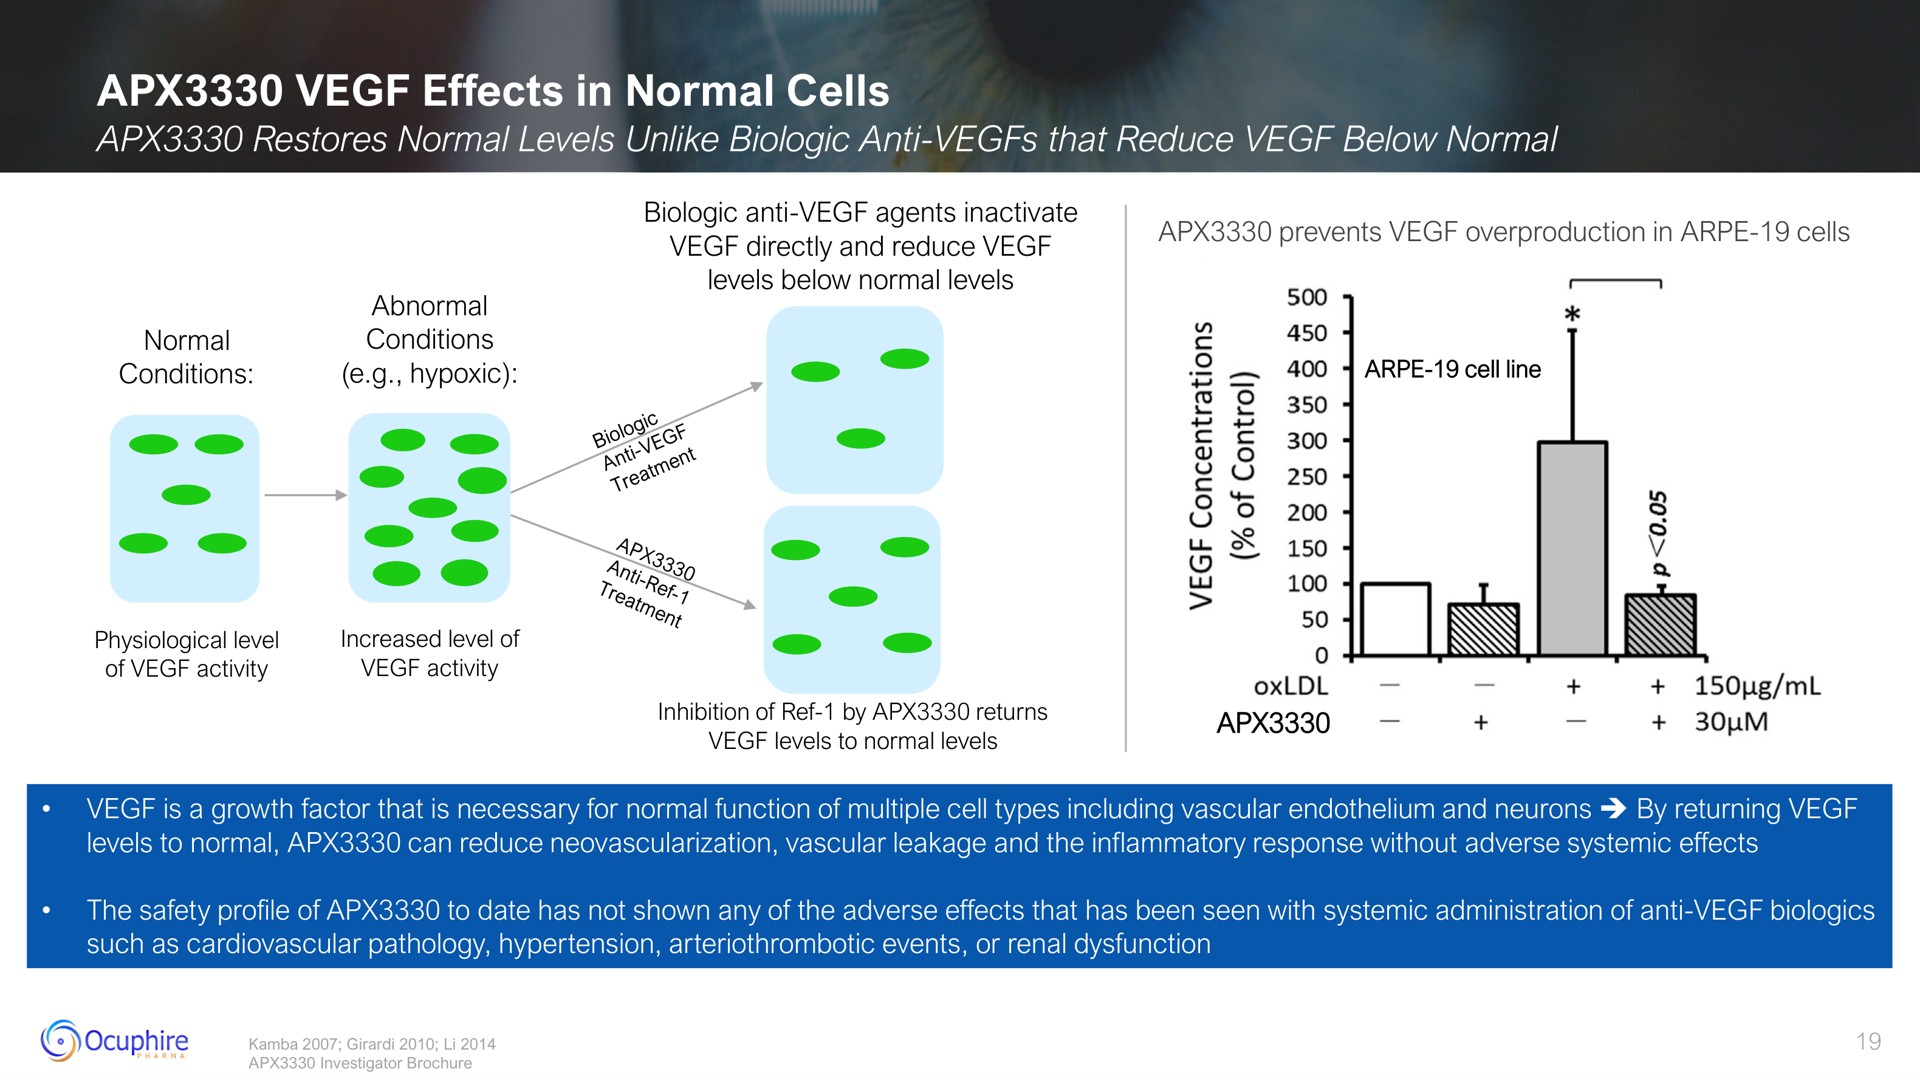 effects in normal cells | Ocuphire Pharma